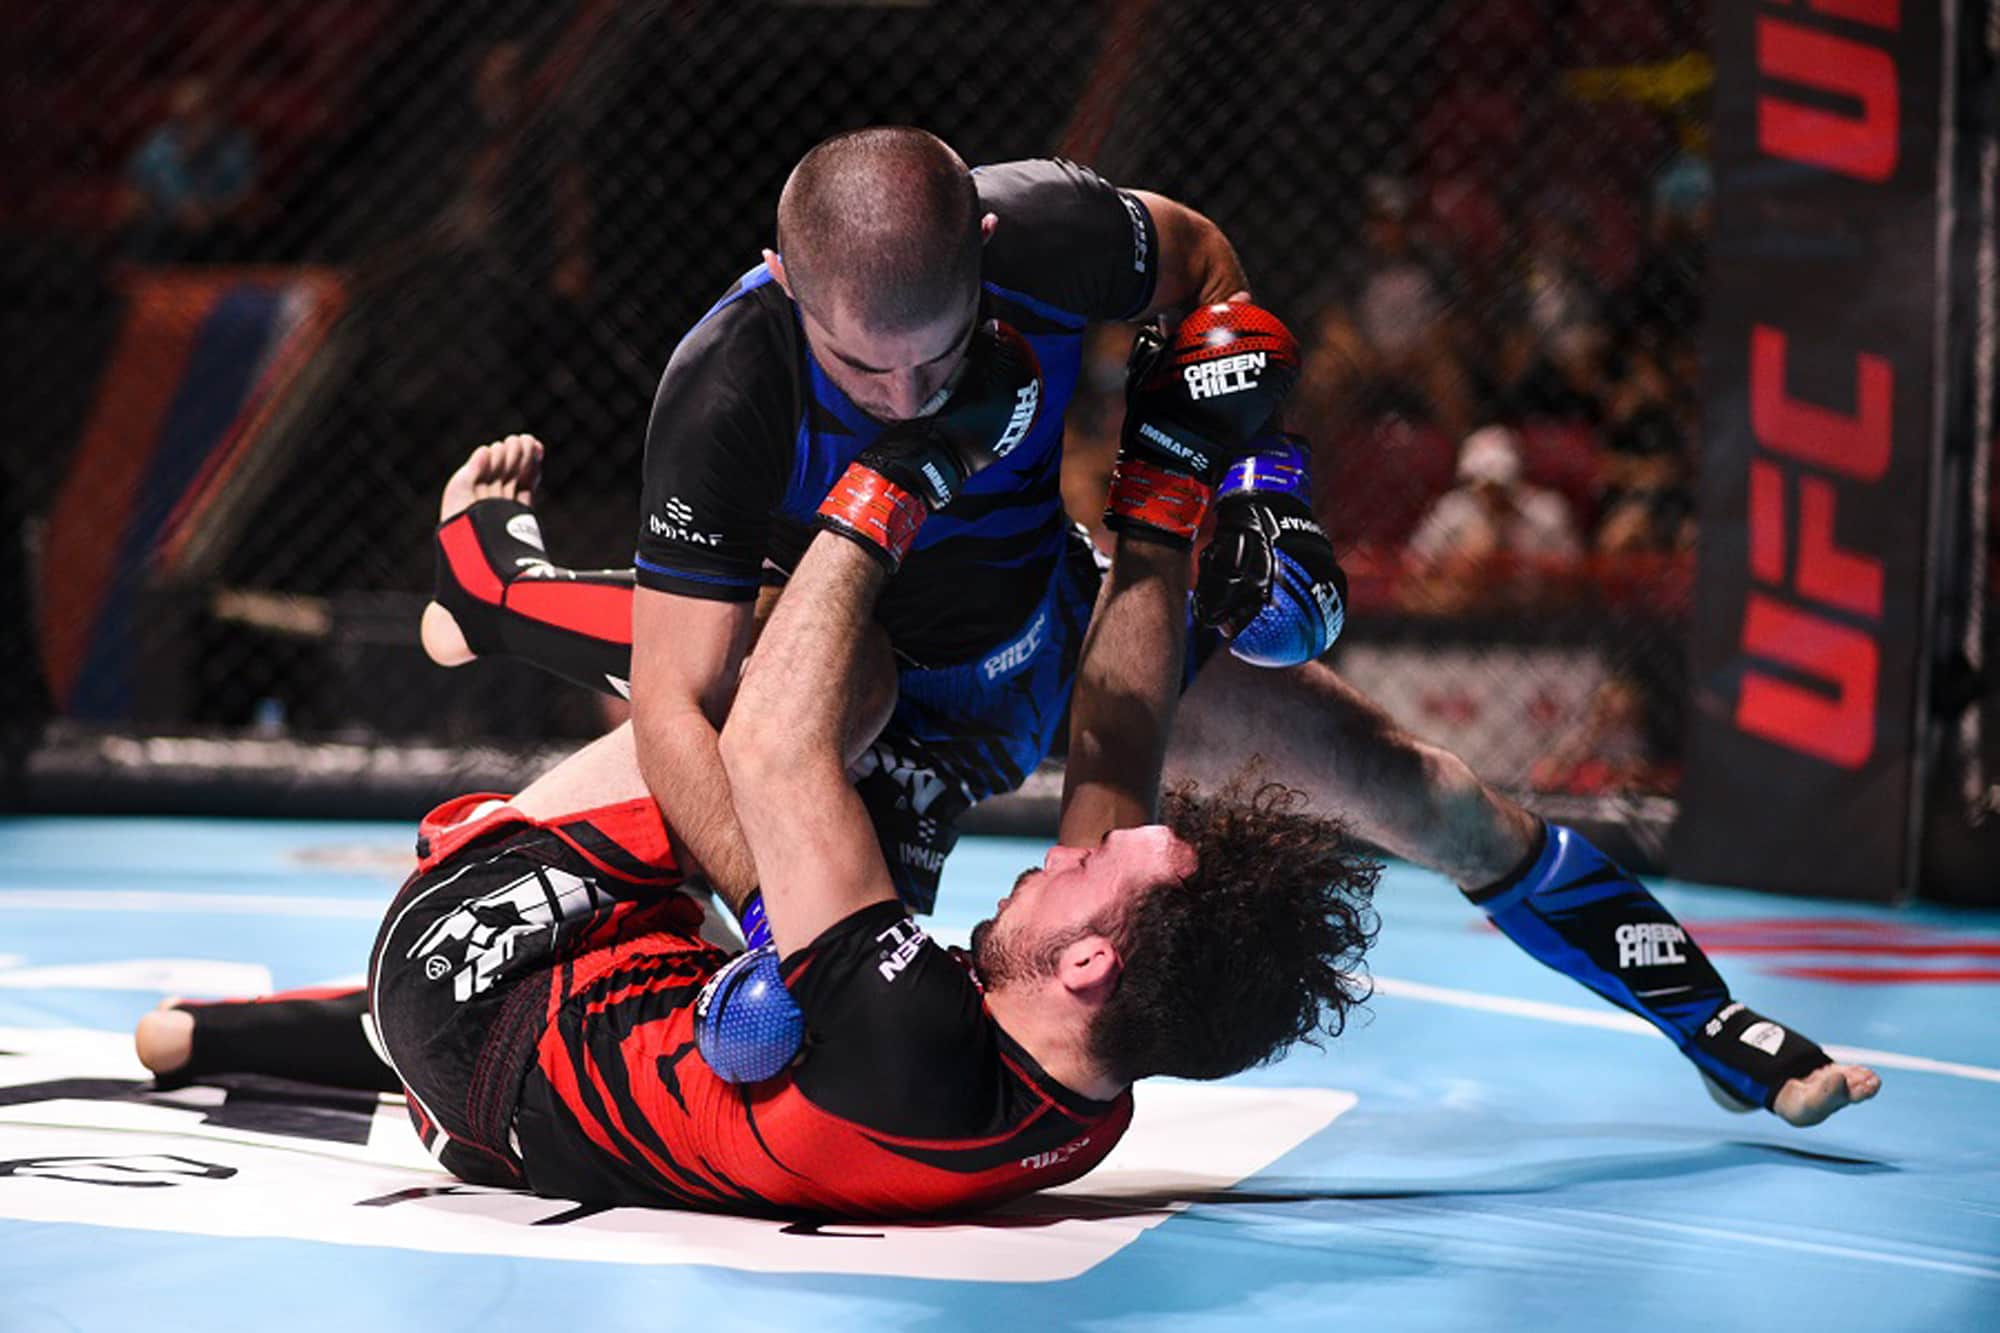 2021 IMMAF Euros: Day 2 Results & Day 3 Schedule